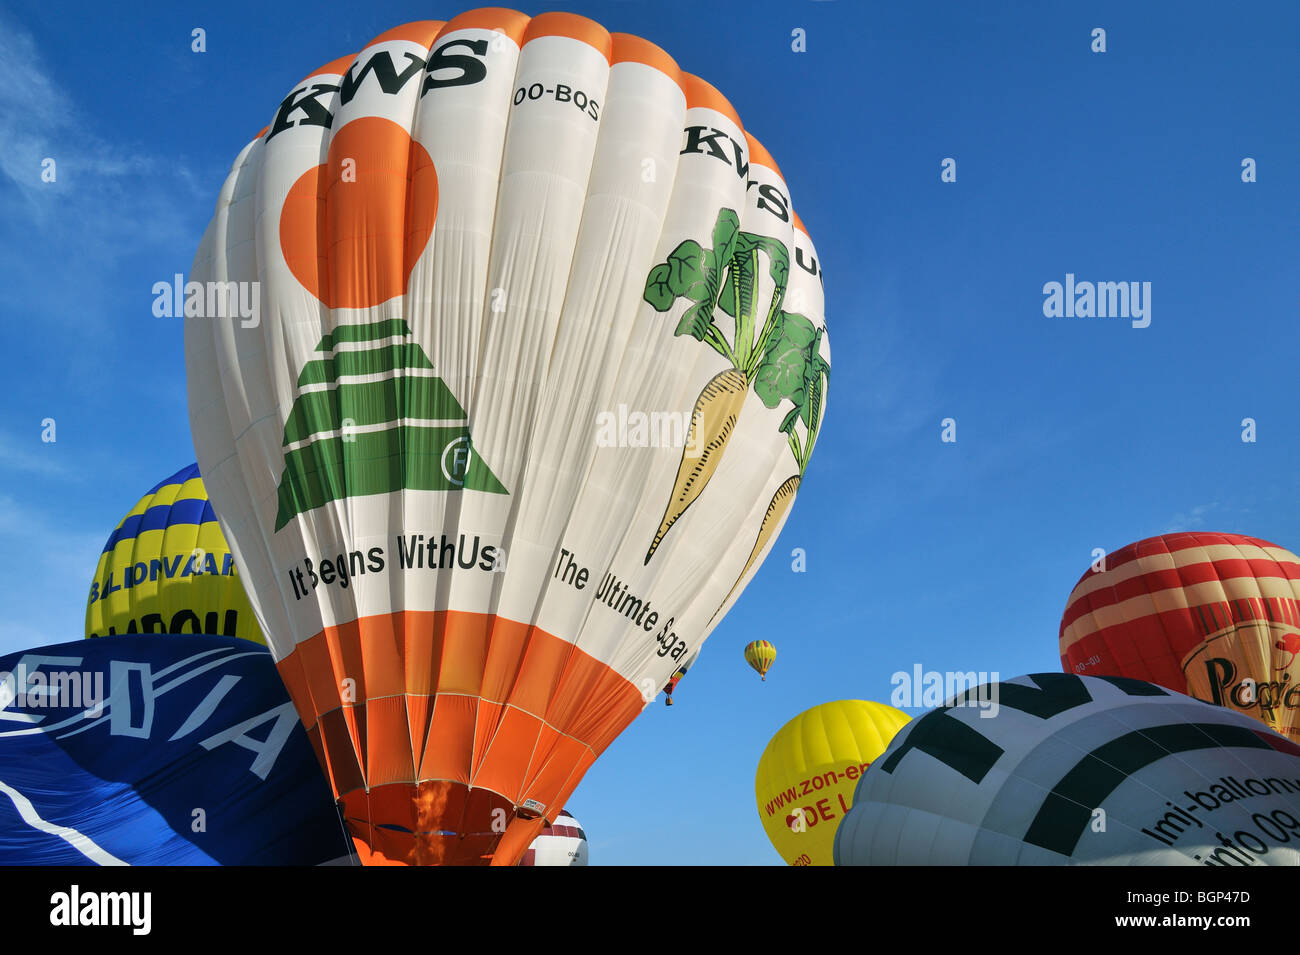 Balloonists / Aeronauts are taking off with hot-air balloons during ballooning meeting Stock Photo